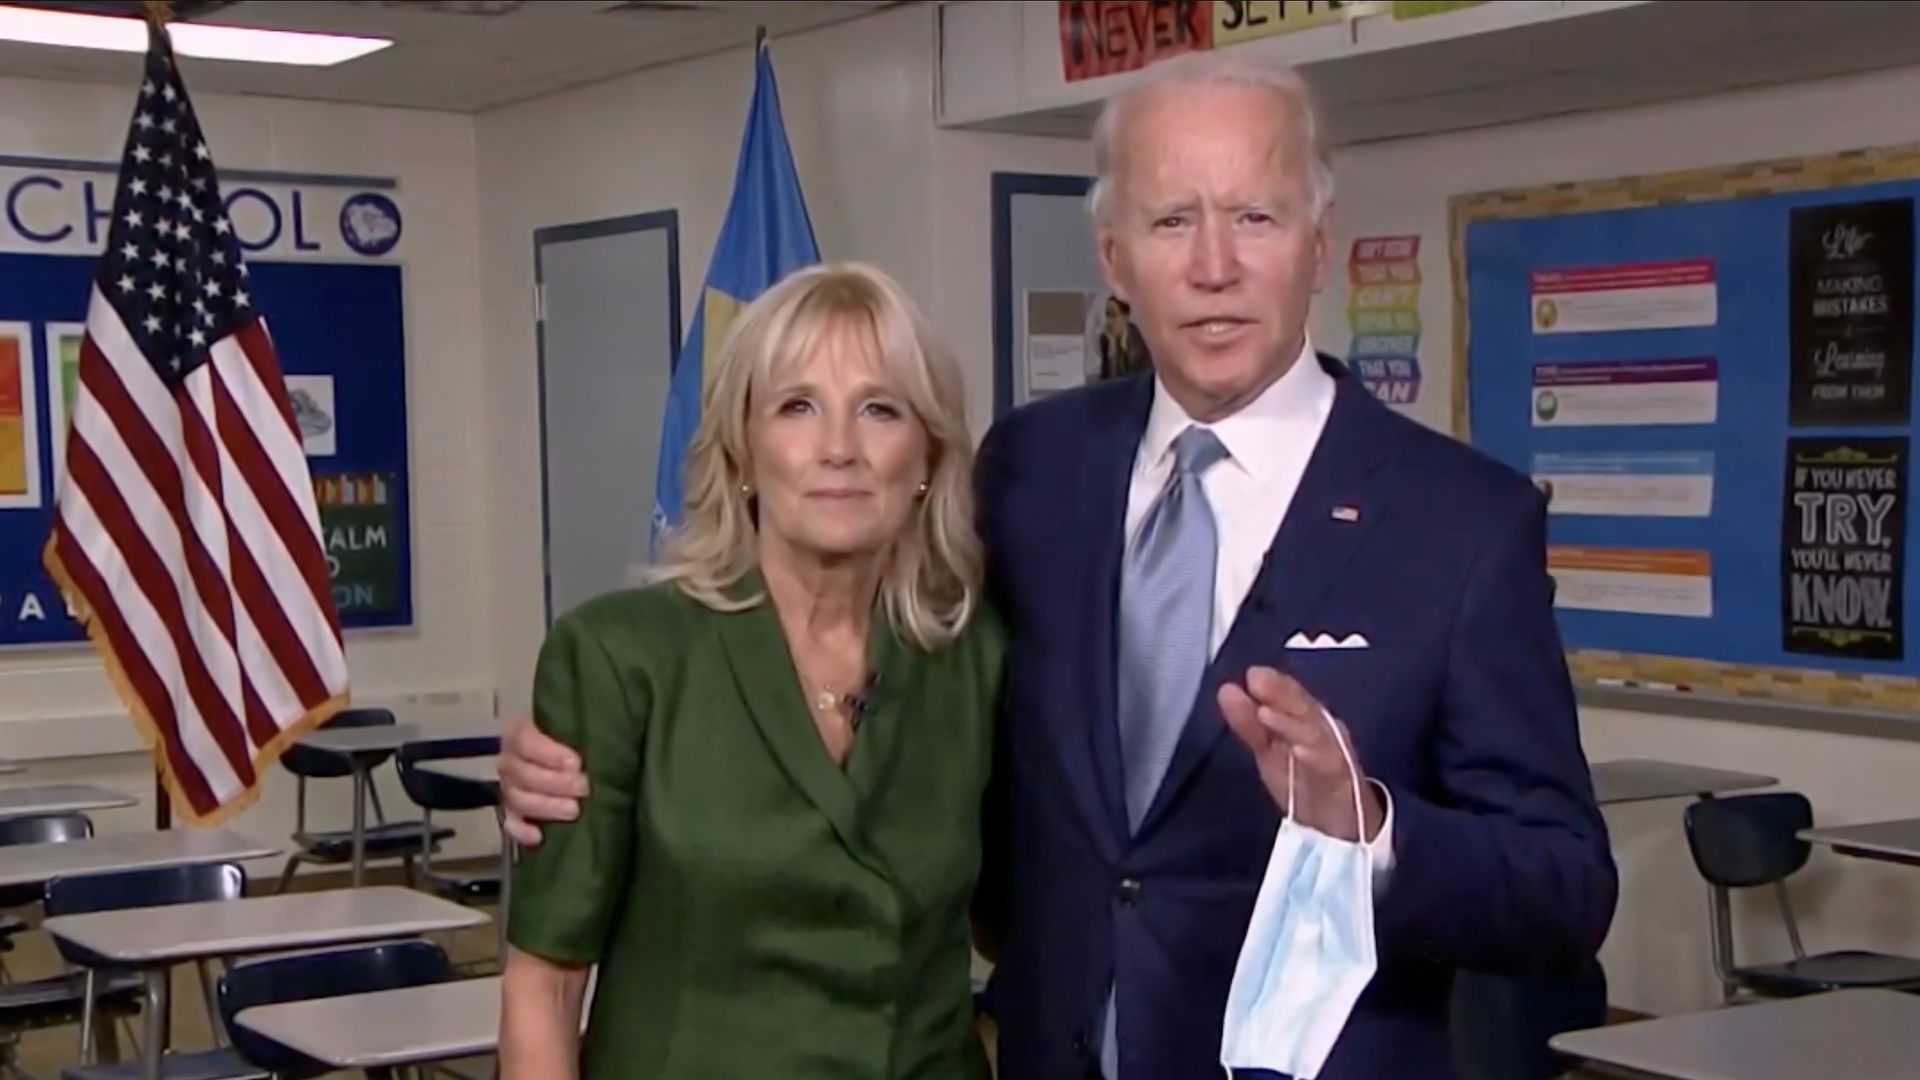 Presumptive Democratic presidential nominee former Vice President Joe Biden holds a mask in his hand as he joins Former U.S. Second Lady Dr. Jill Biden in a classroom